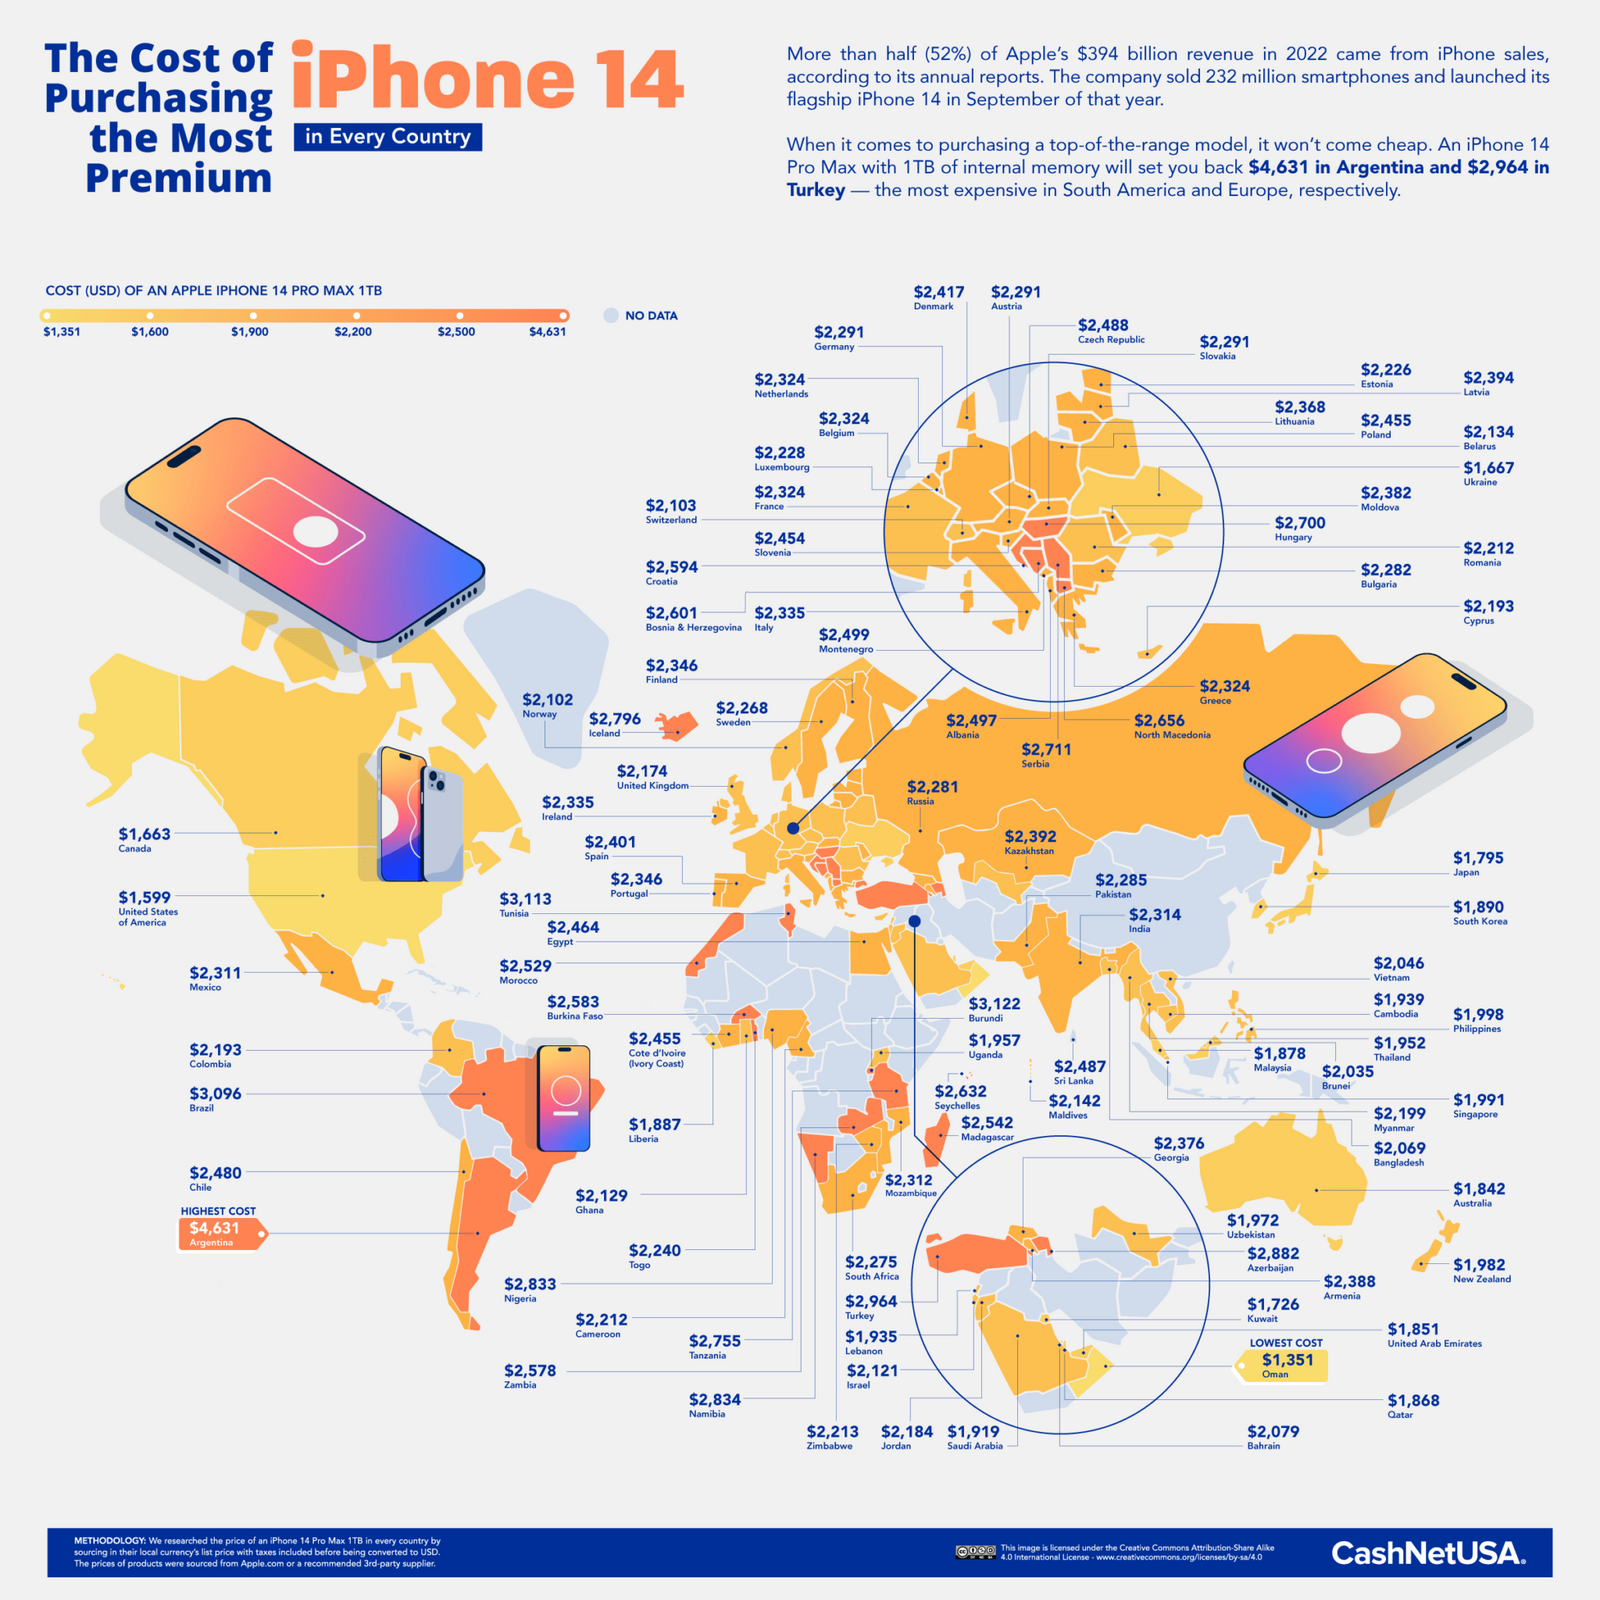 The Cost Of The Most Premium iPhone 14 in Every Country - Infographic